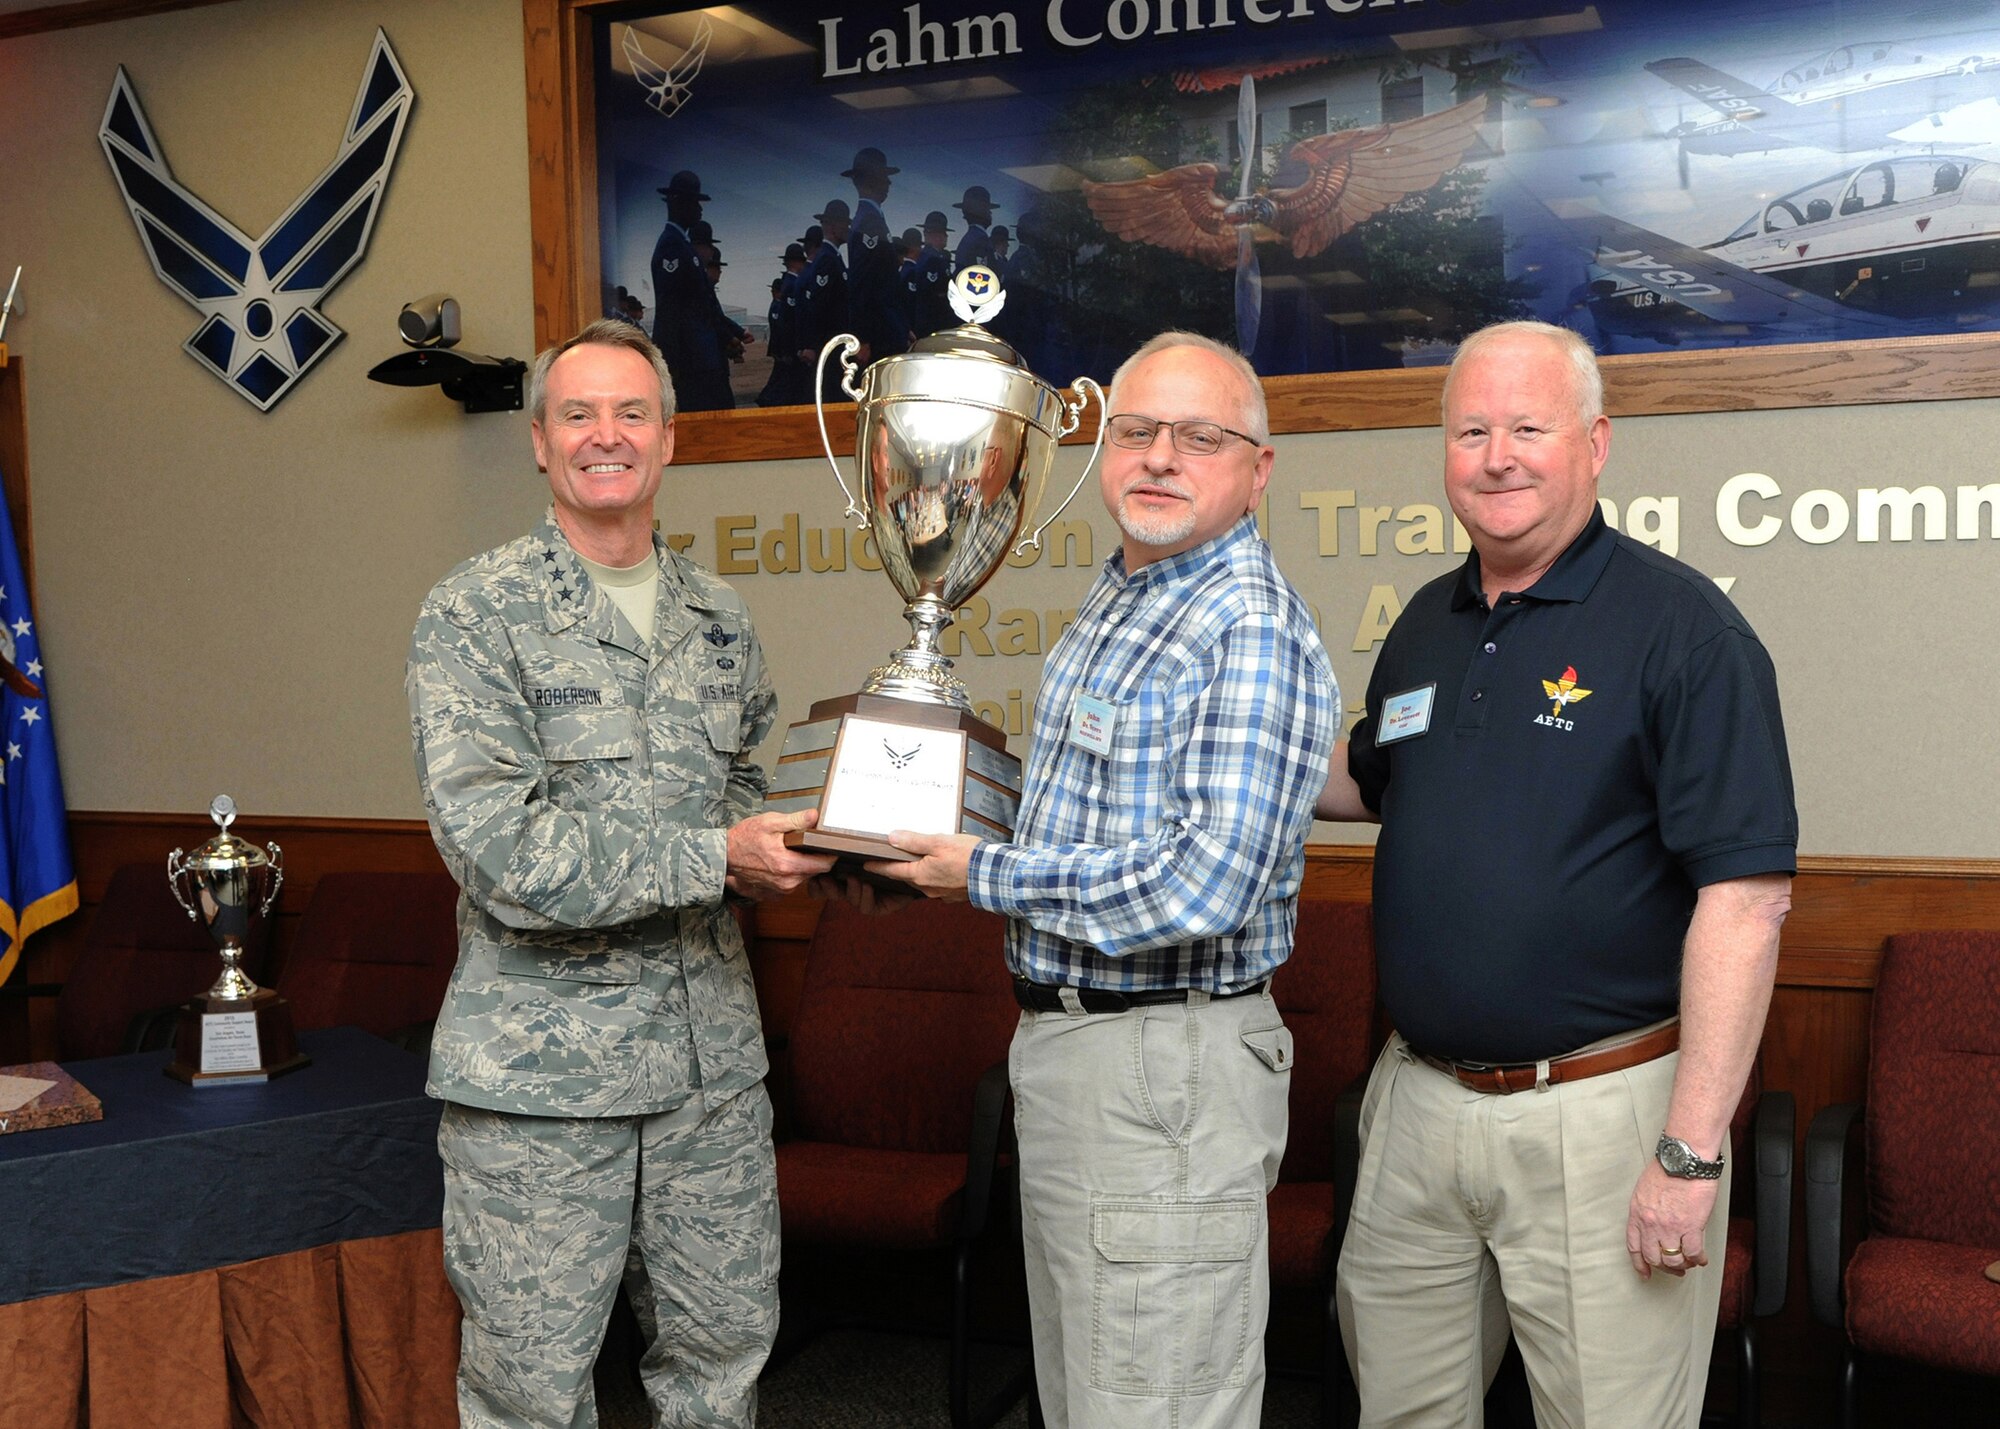 Lt. Gen. Darryl Roberson, commander of Air
Education and Training Command, and Joe Leverett (right), chairman of the
Altus Trophy selection committee, present the 2015 Altus Trophy to Dr. John
Veres III (center), chancellor of Auburn University Montgomery, Alabama,
March 23 at Joint Base San Antonio-Randolph, Texas. Roberson announced
Montgomery, Alabama, as the 2015 Altus Trophy winner during the AETC
Commander's Civic Leader Group Spring Meeting here. (U.S. Air Force photo by
Melissa Peterson)
